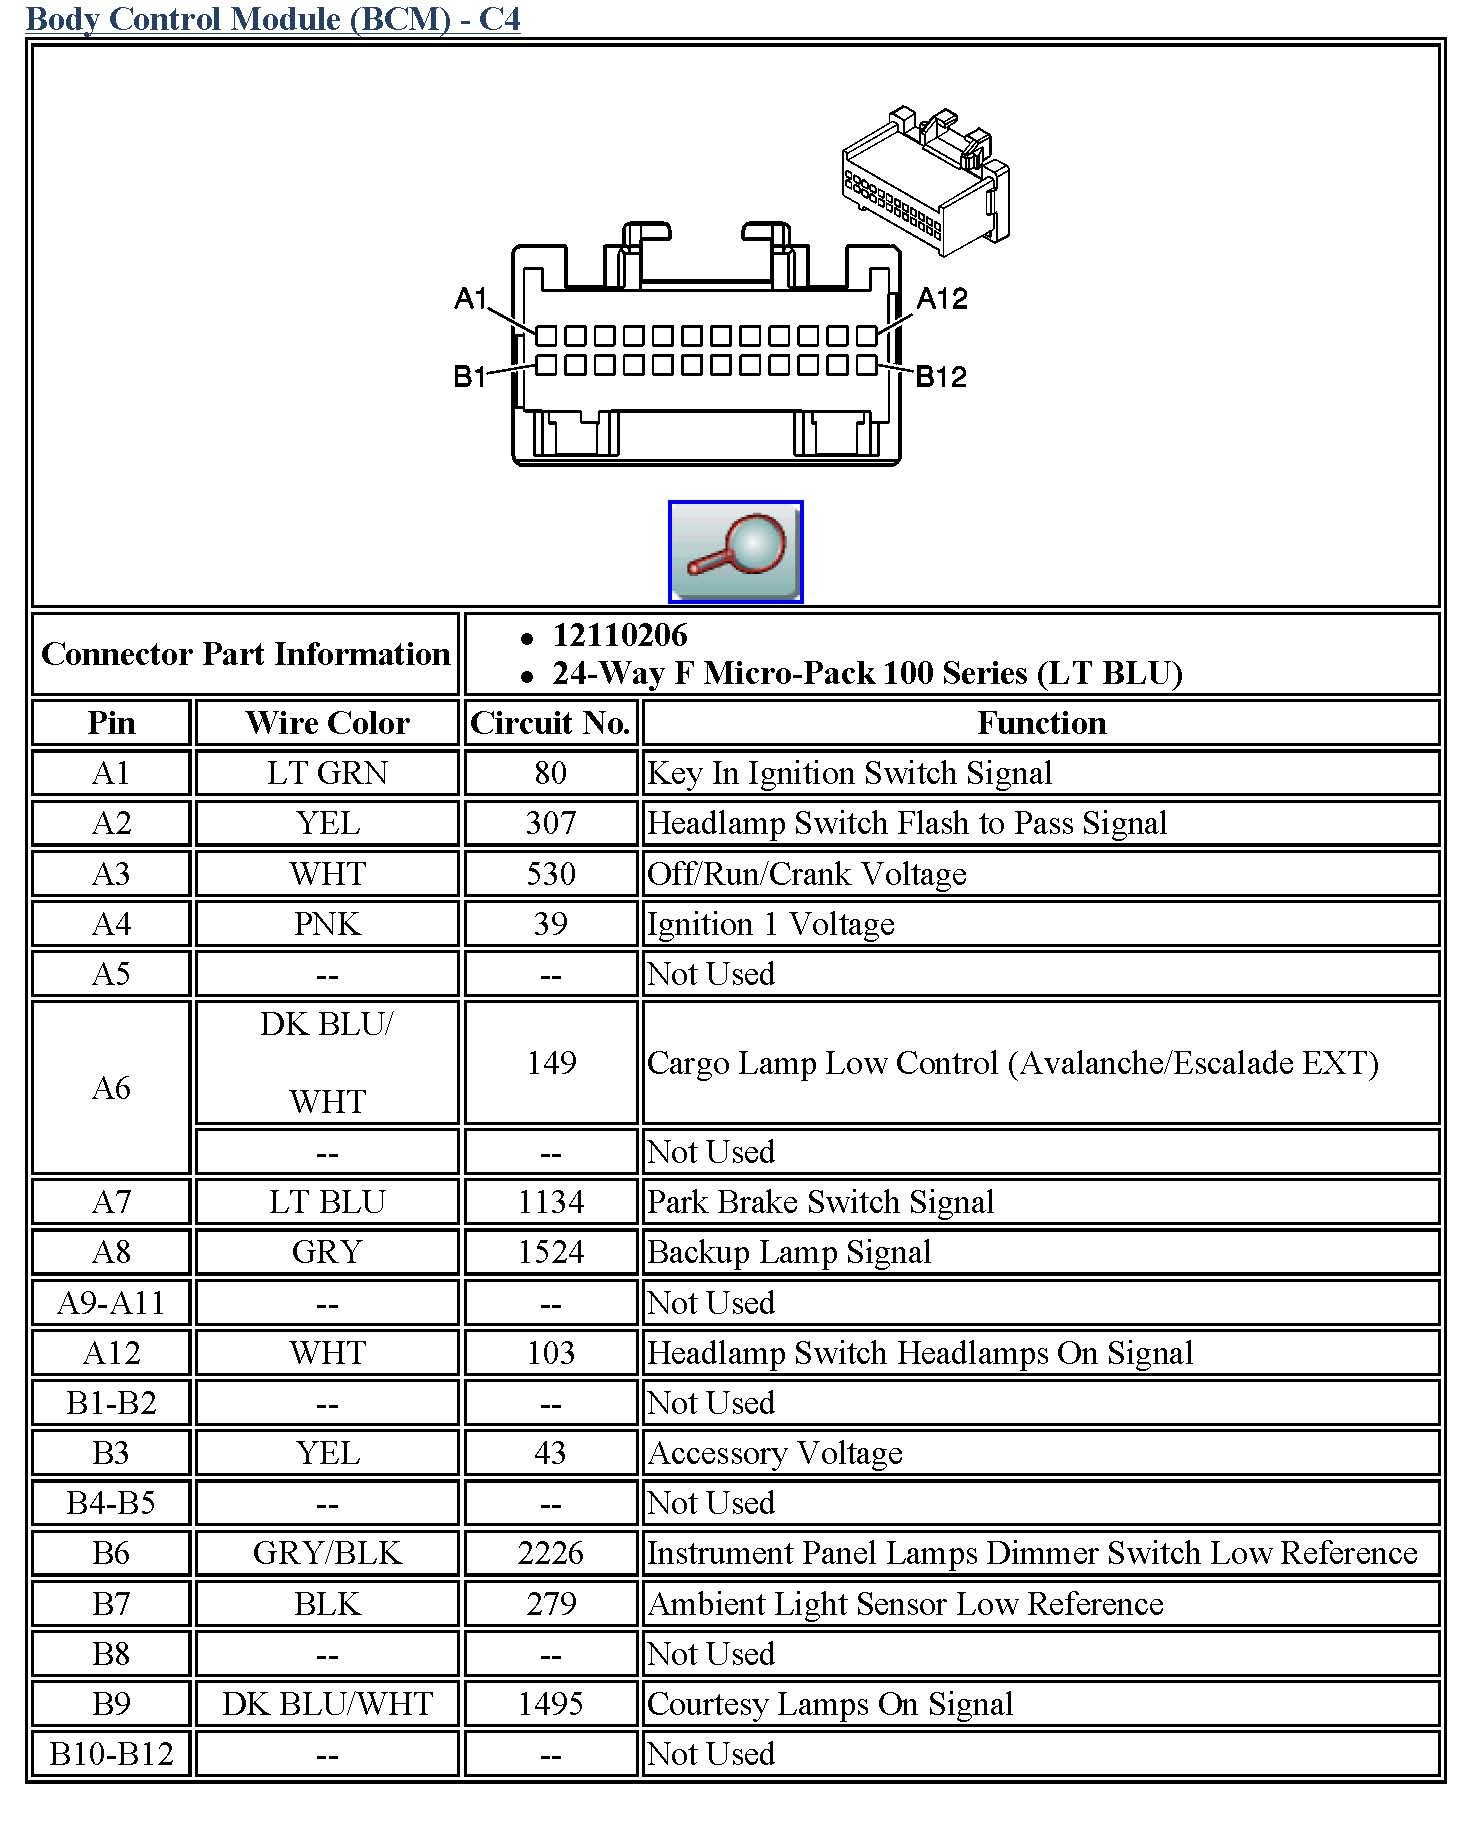 Stereo Wiring Diagram For 2004 Chevy Impala | Wiring Diagram - 2004 Chevy Impala Radio Wiring Diagram